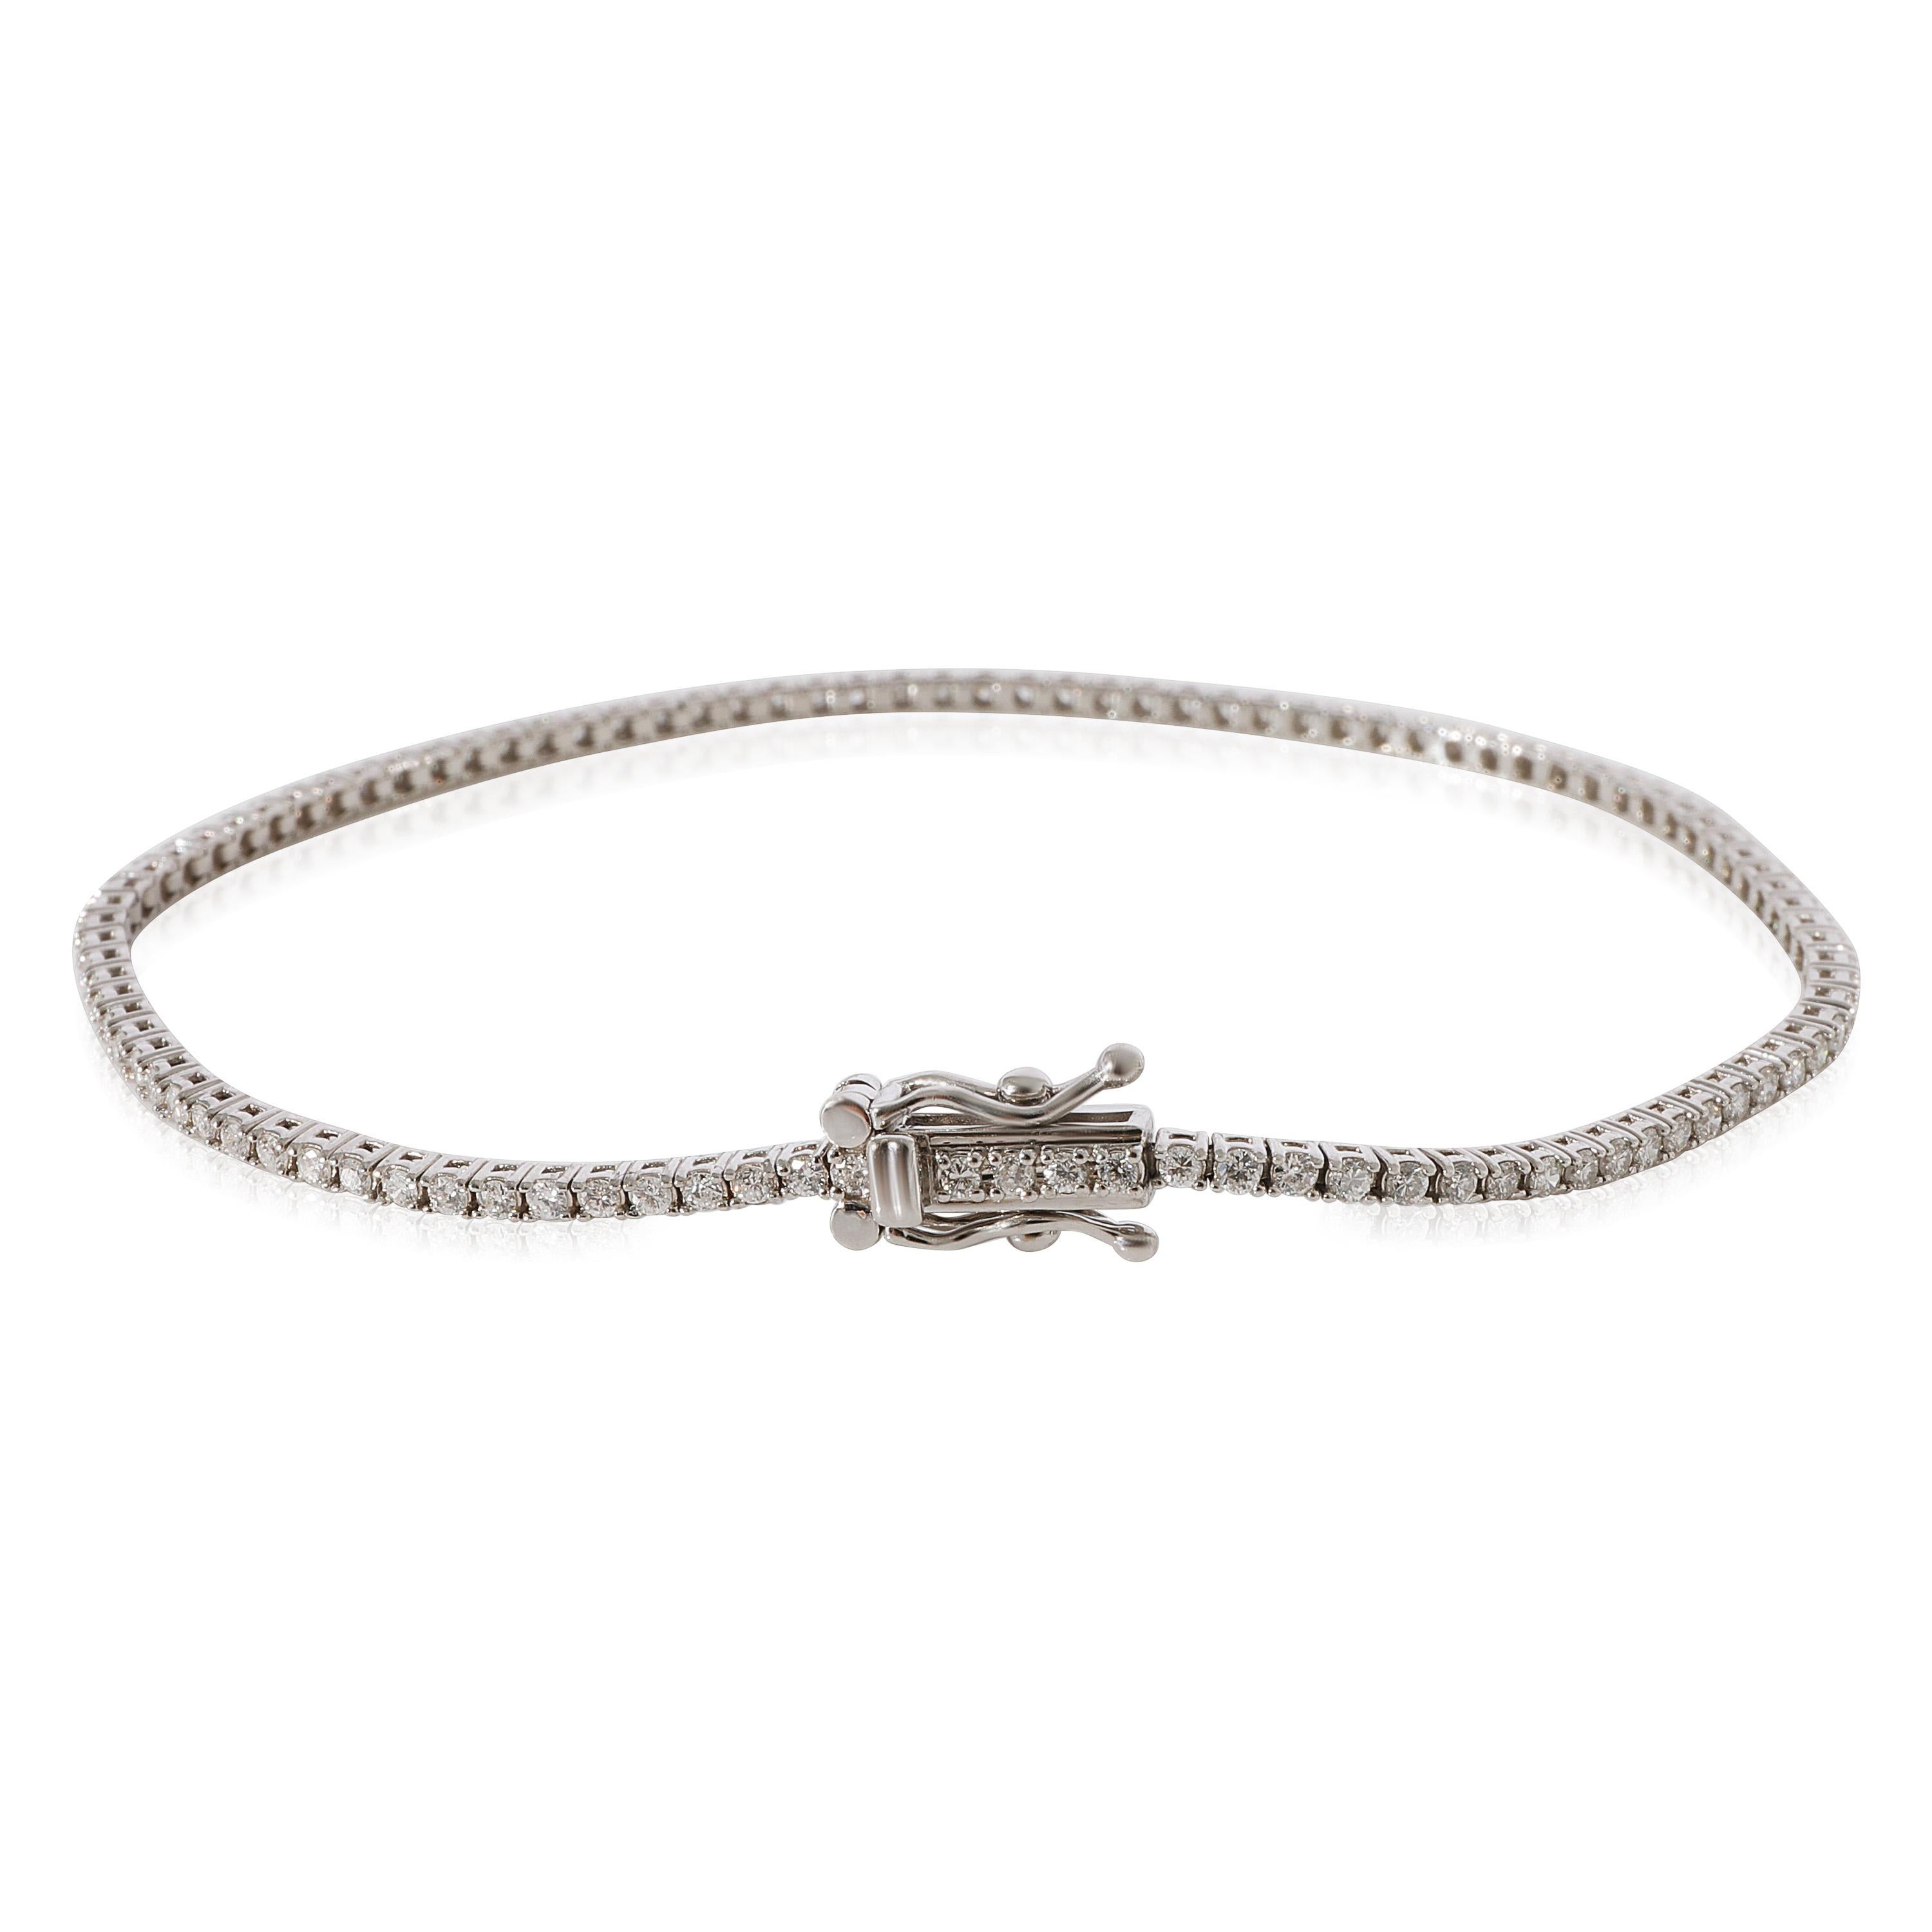 Diamond Micro Tennis Bracelet in 14k White Gold 1.00 CTW

PRIMARY DETAILS
SKU: 130572
Listing Title: Diamond Micro Tennis Bracelet in 14k White Gold 1.00 CTW
Condition Description: Retails for 2000 USD. In excellent condition.
Metal Type: White